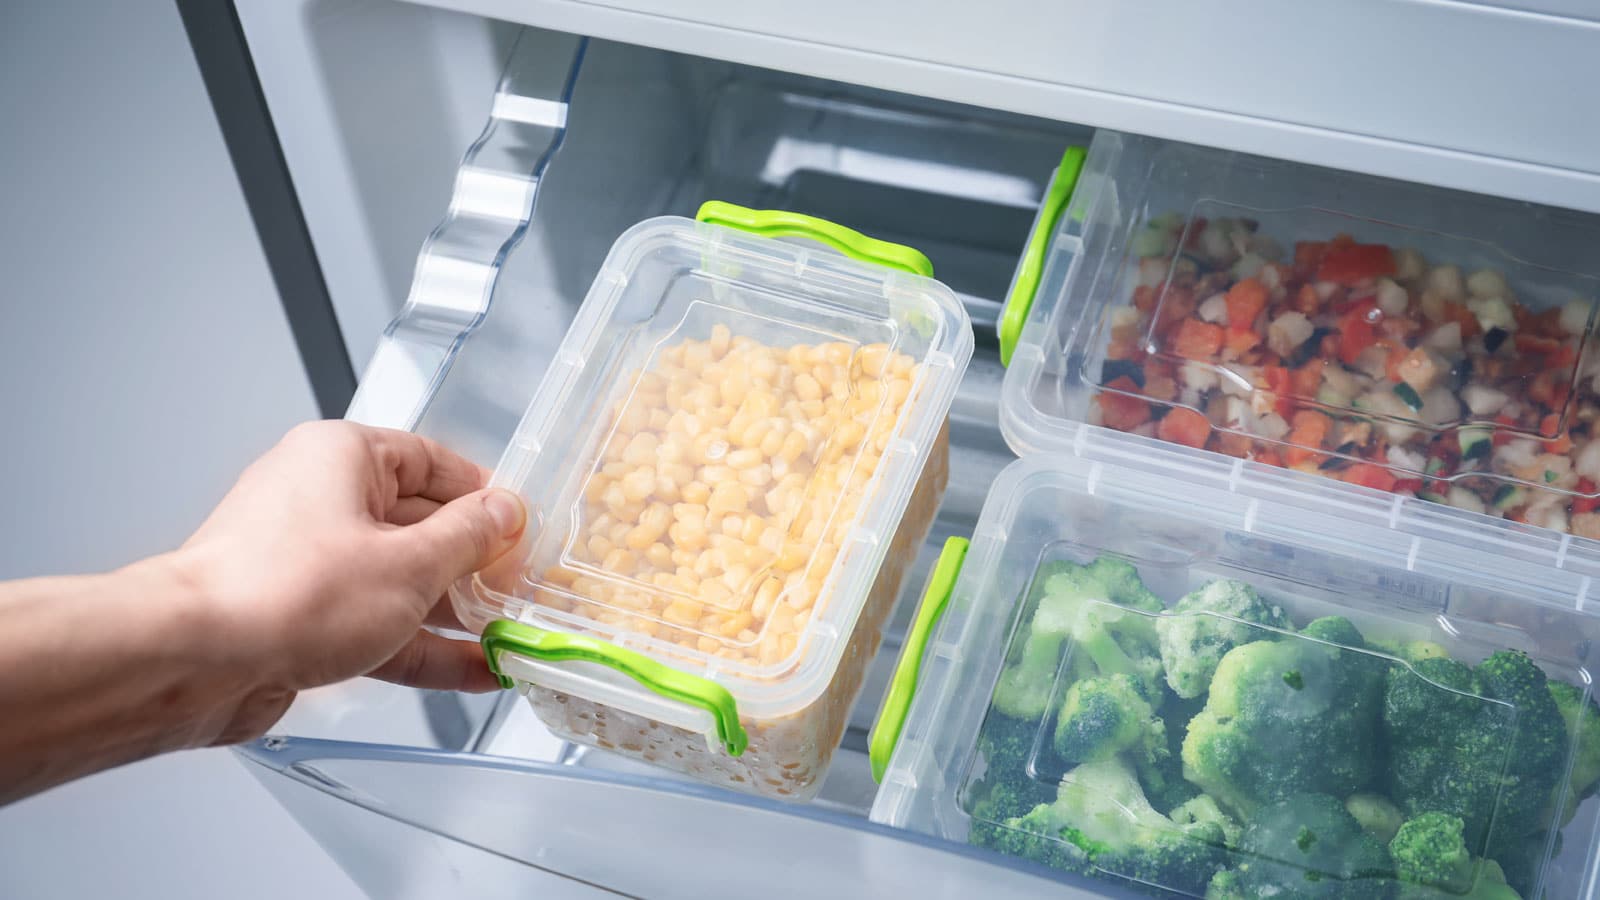 The Best Food Freezer Containers for Freezer Meals